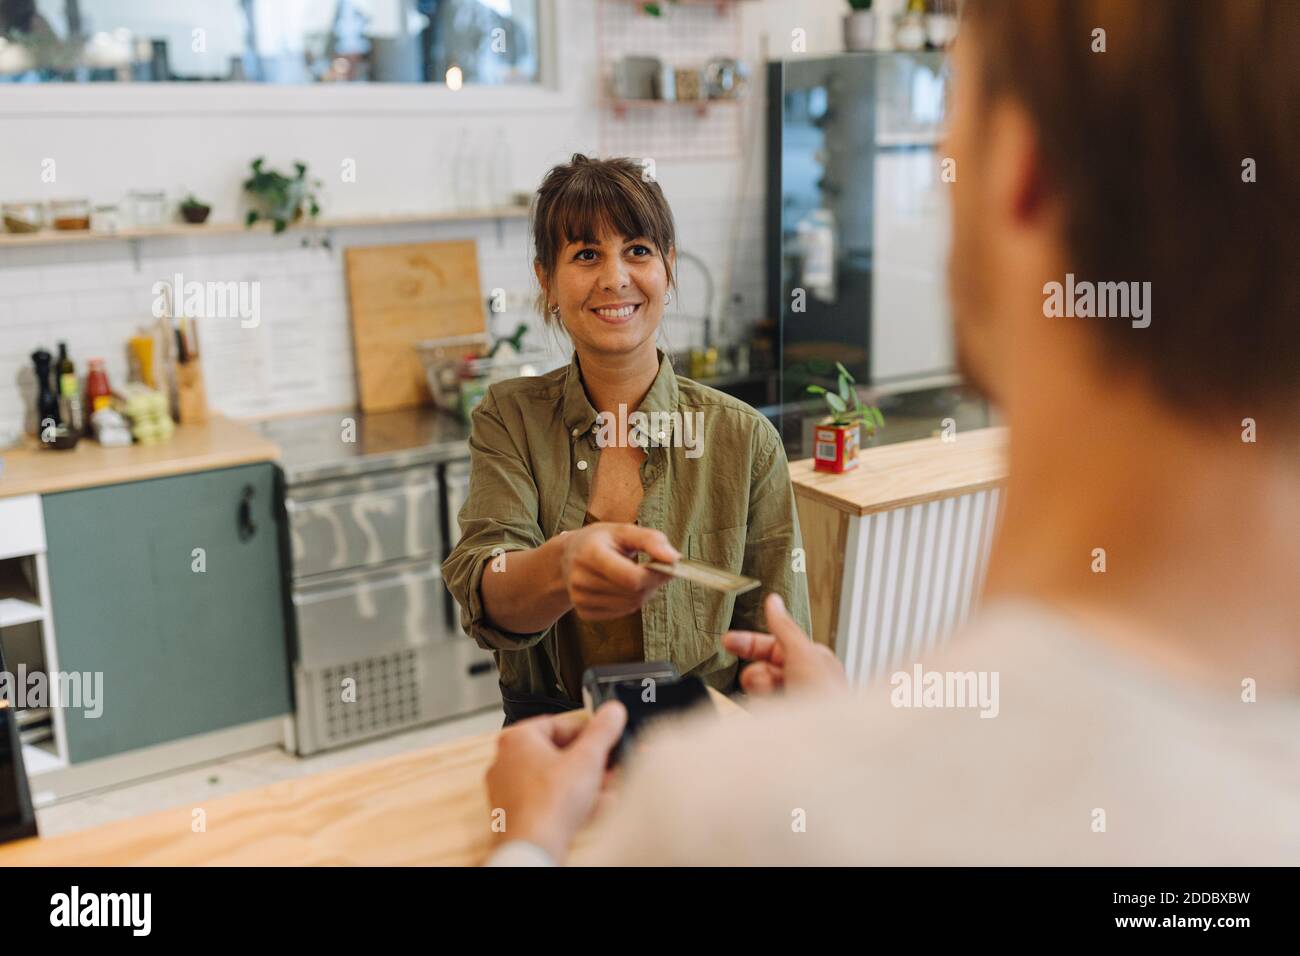 Smiling female owner giving back credit card to male customer at checkout in coffee shop Stock Photo